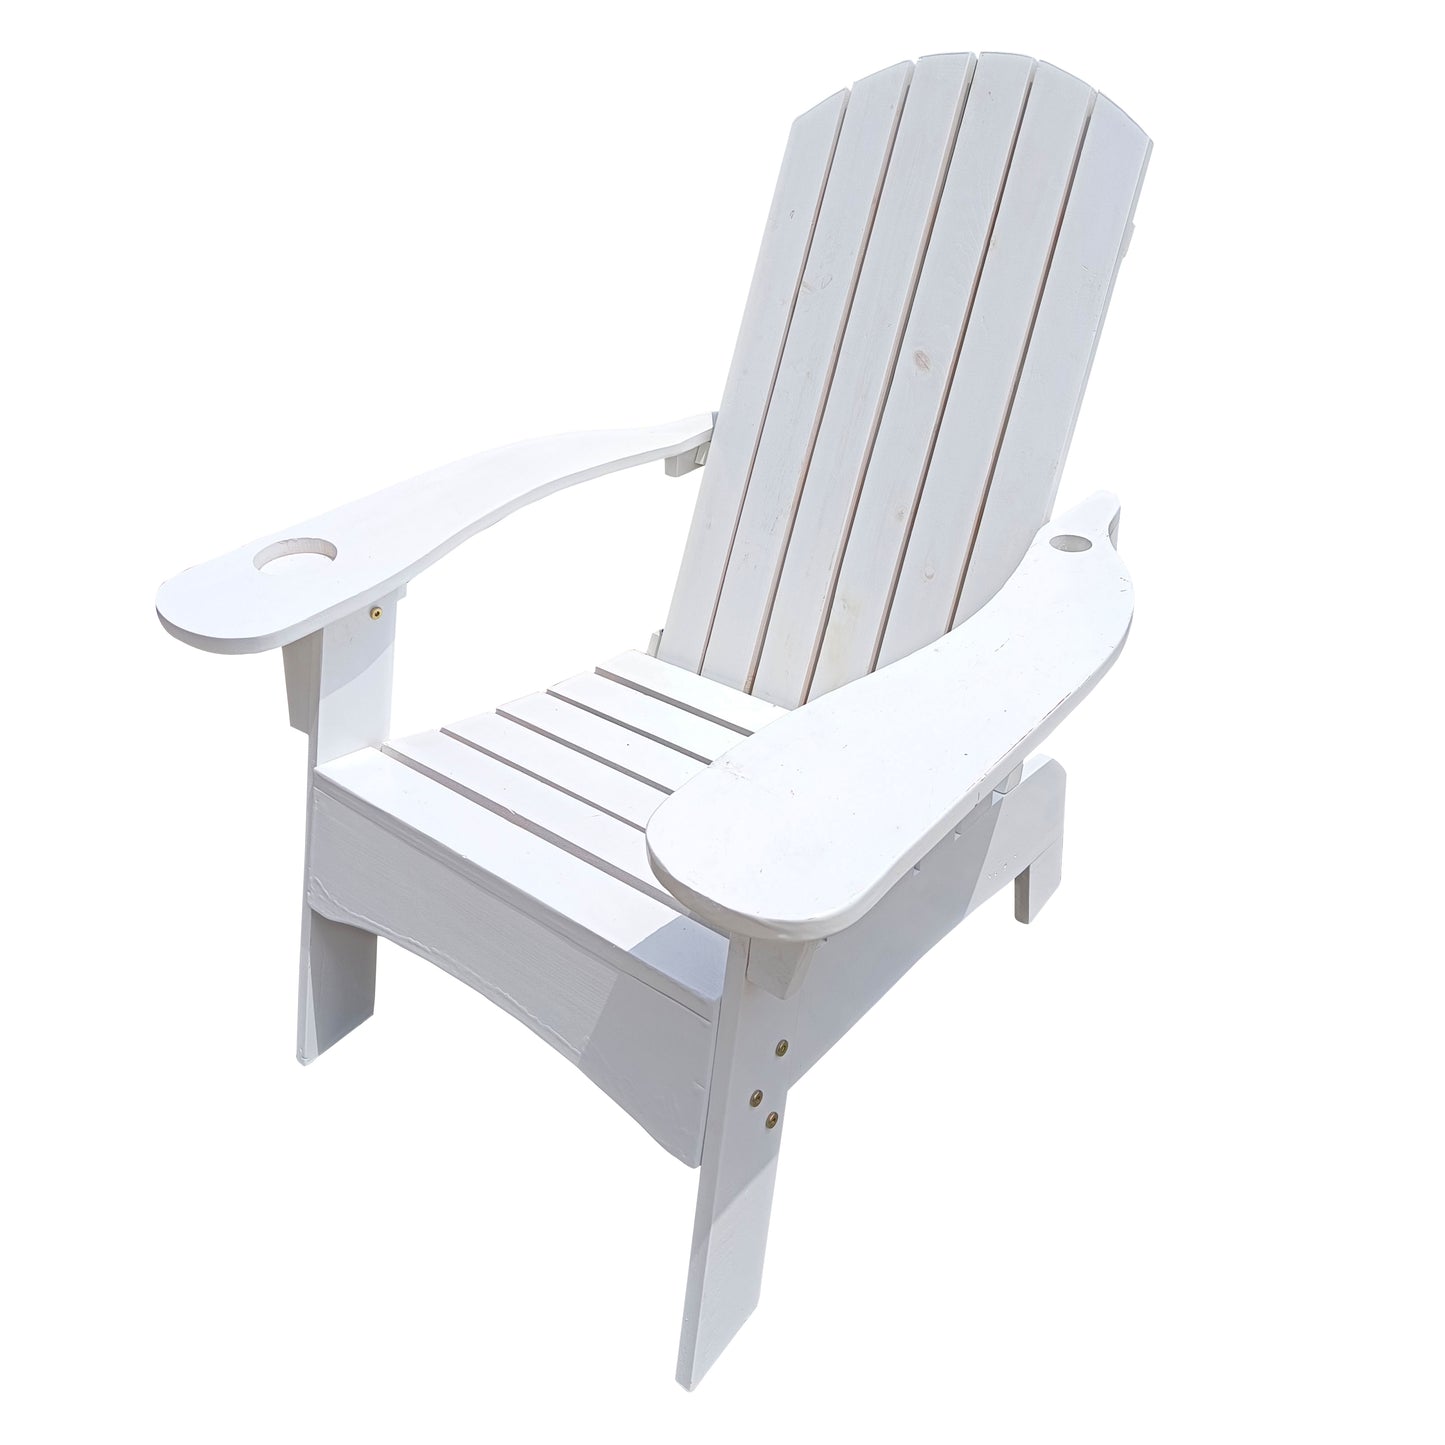 Outdoor or indoor Wood Adirondack chair with an hole to hold umbrella on the arm, white